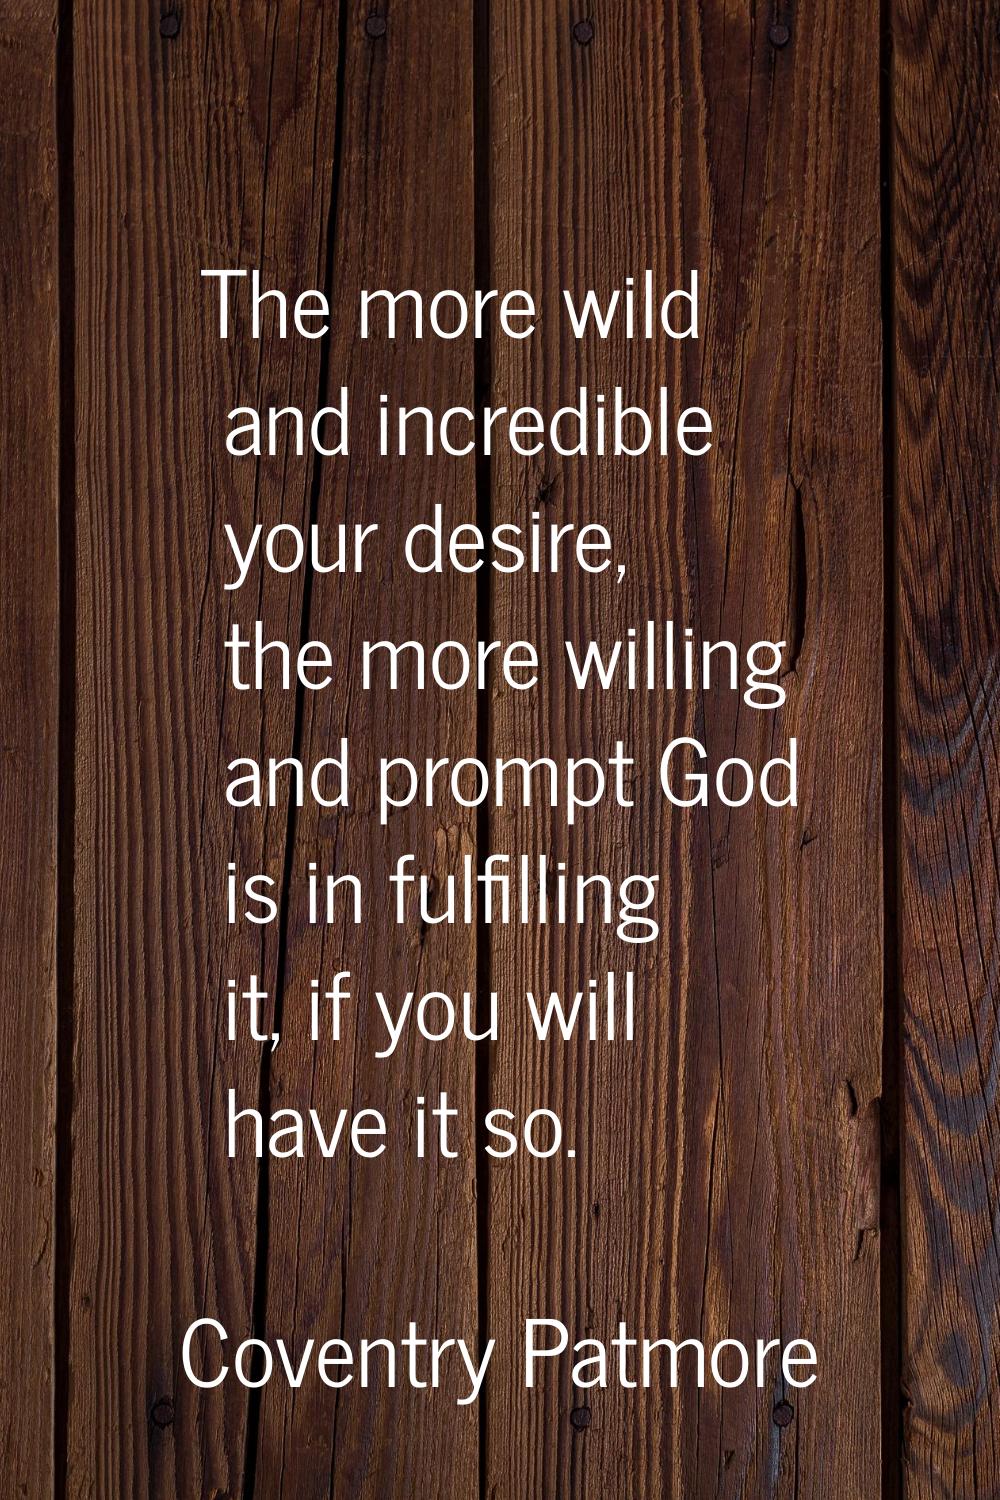 The more wild and incredible your desire, the more willing and prompt God is in fulfilling it, if y